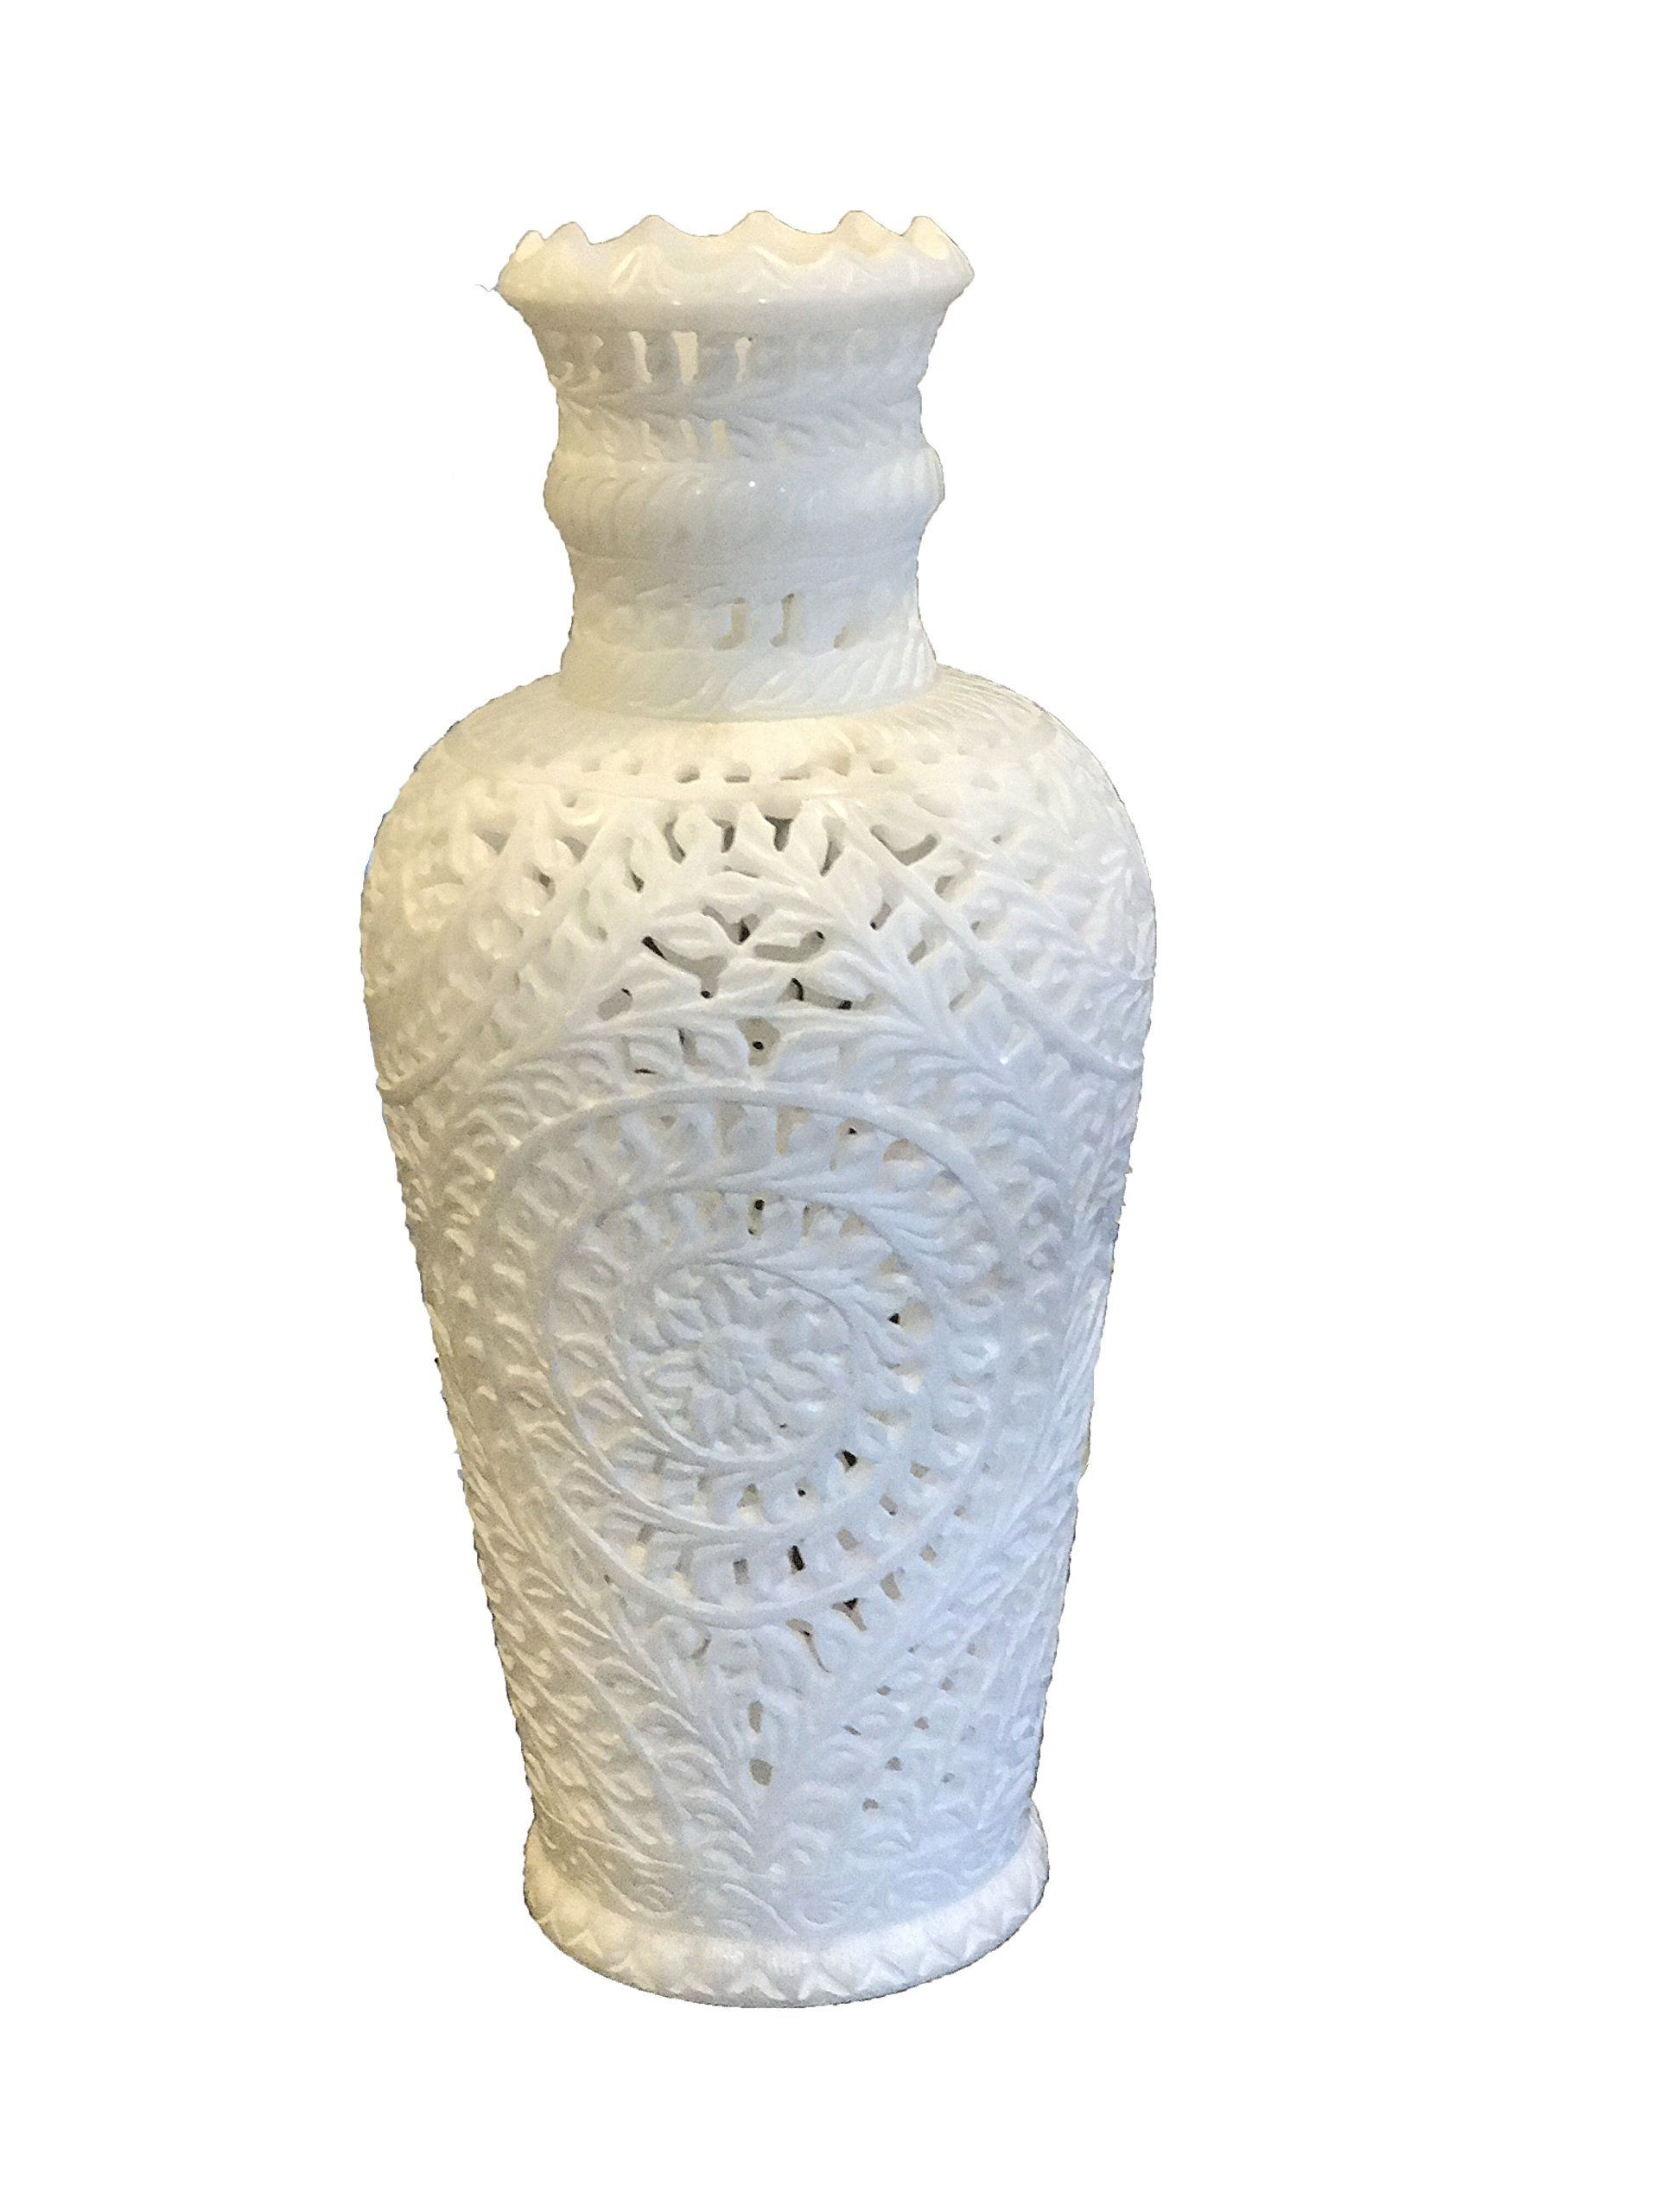 24 Fabulous Waterford Bud Vase 2024 free download waterford bud vase of white marble flower vase handcrafted stone decorative wedding diy in white marble flower vase handcrafted stone decorative wedding diy vases handcrafted by artisans thi